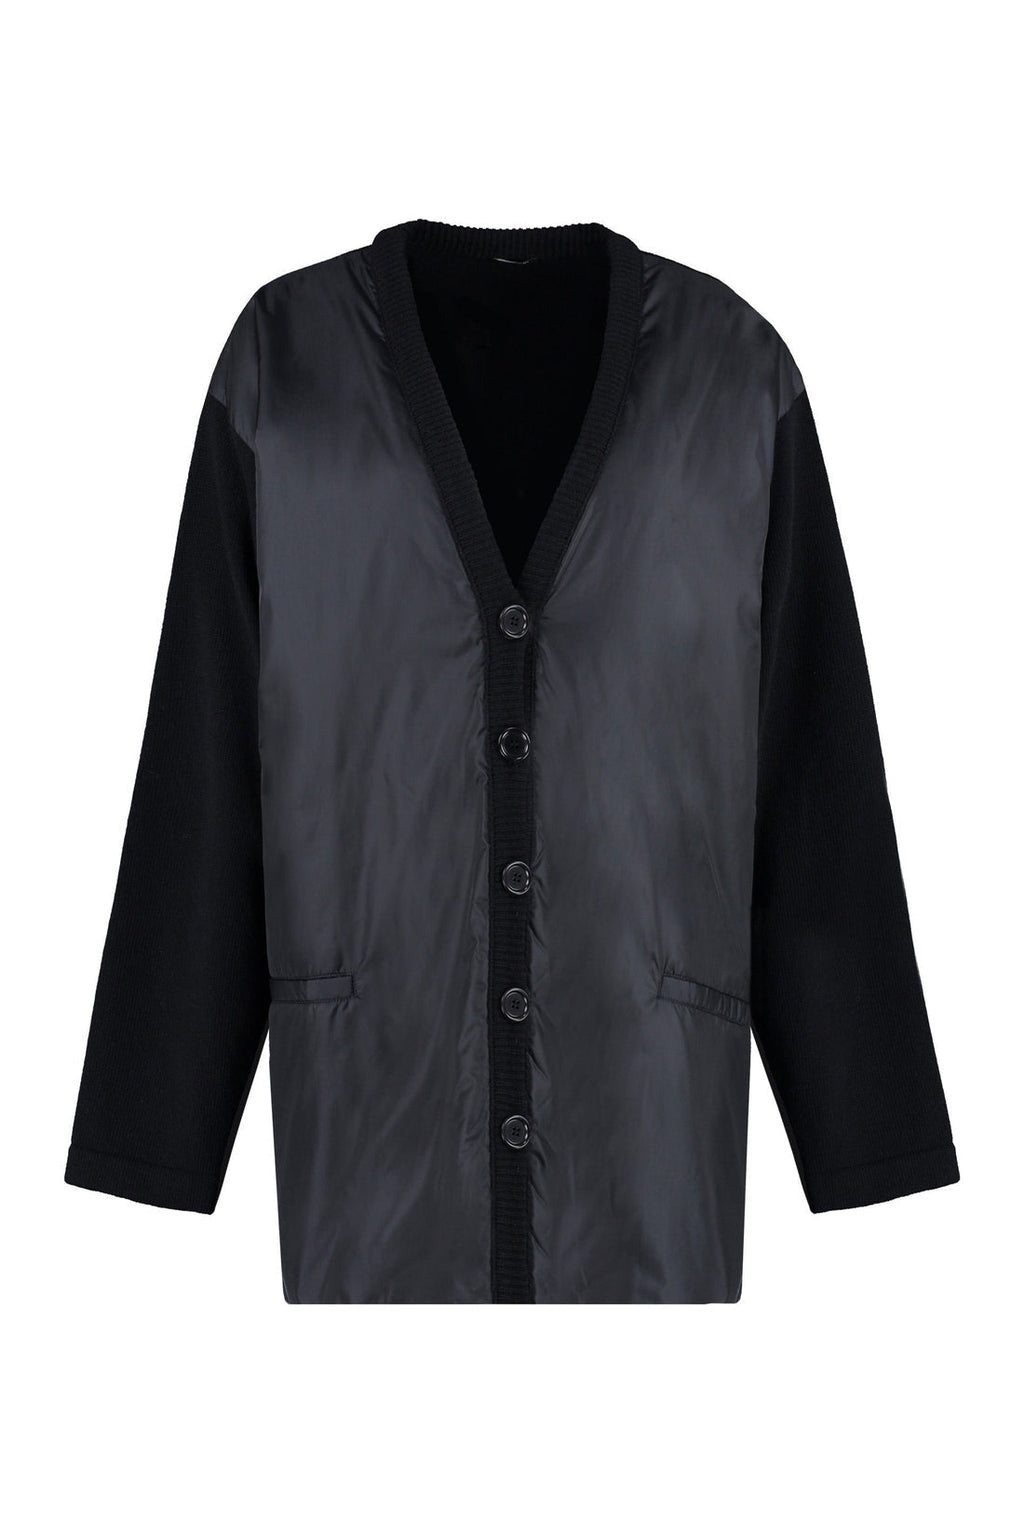 Aspesi-OUTLET-SALE-Cardigan with padded front panel-ARCHIVIST